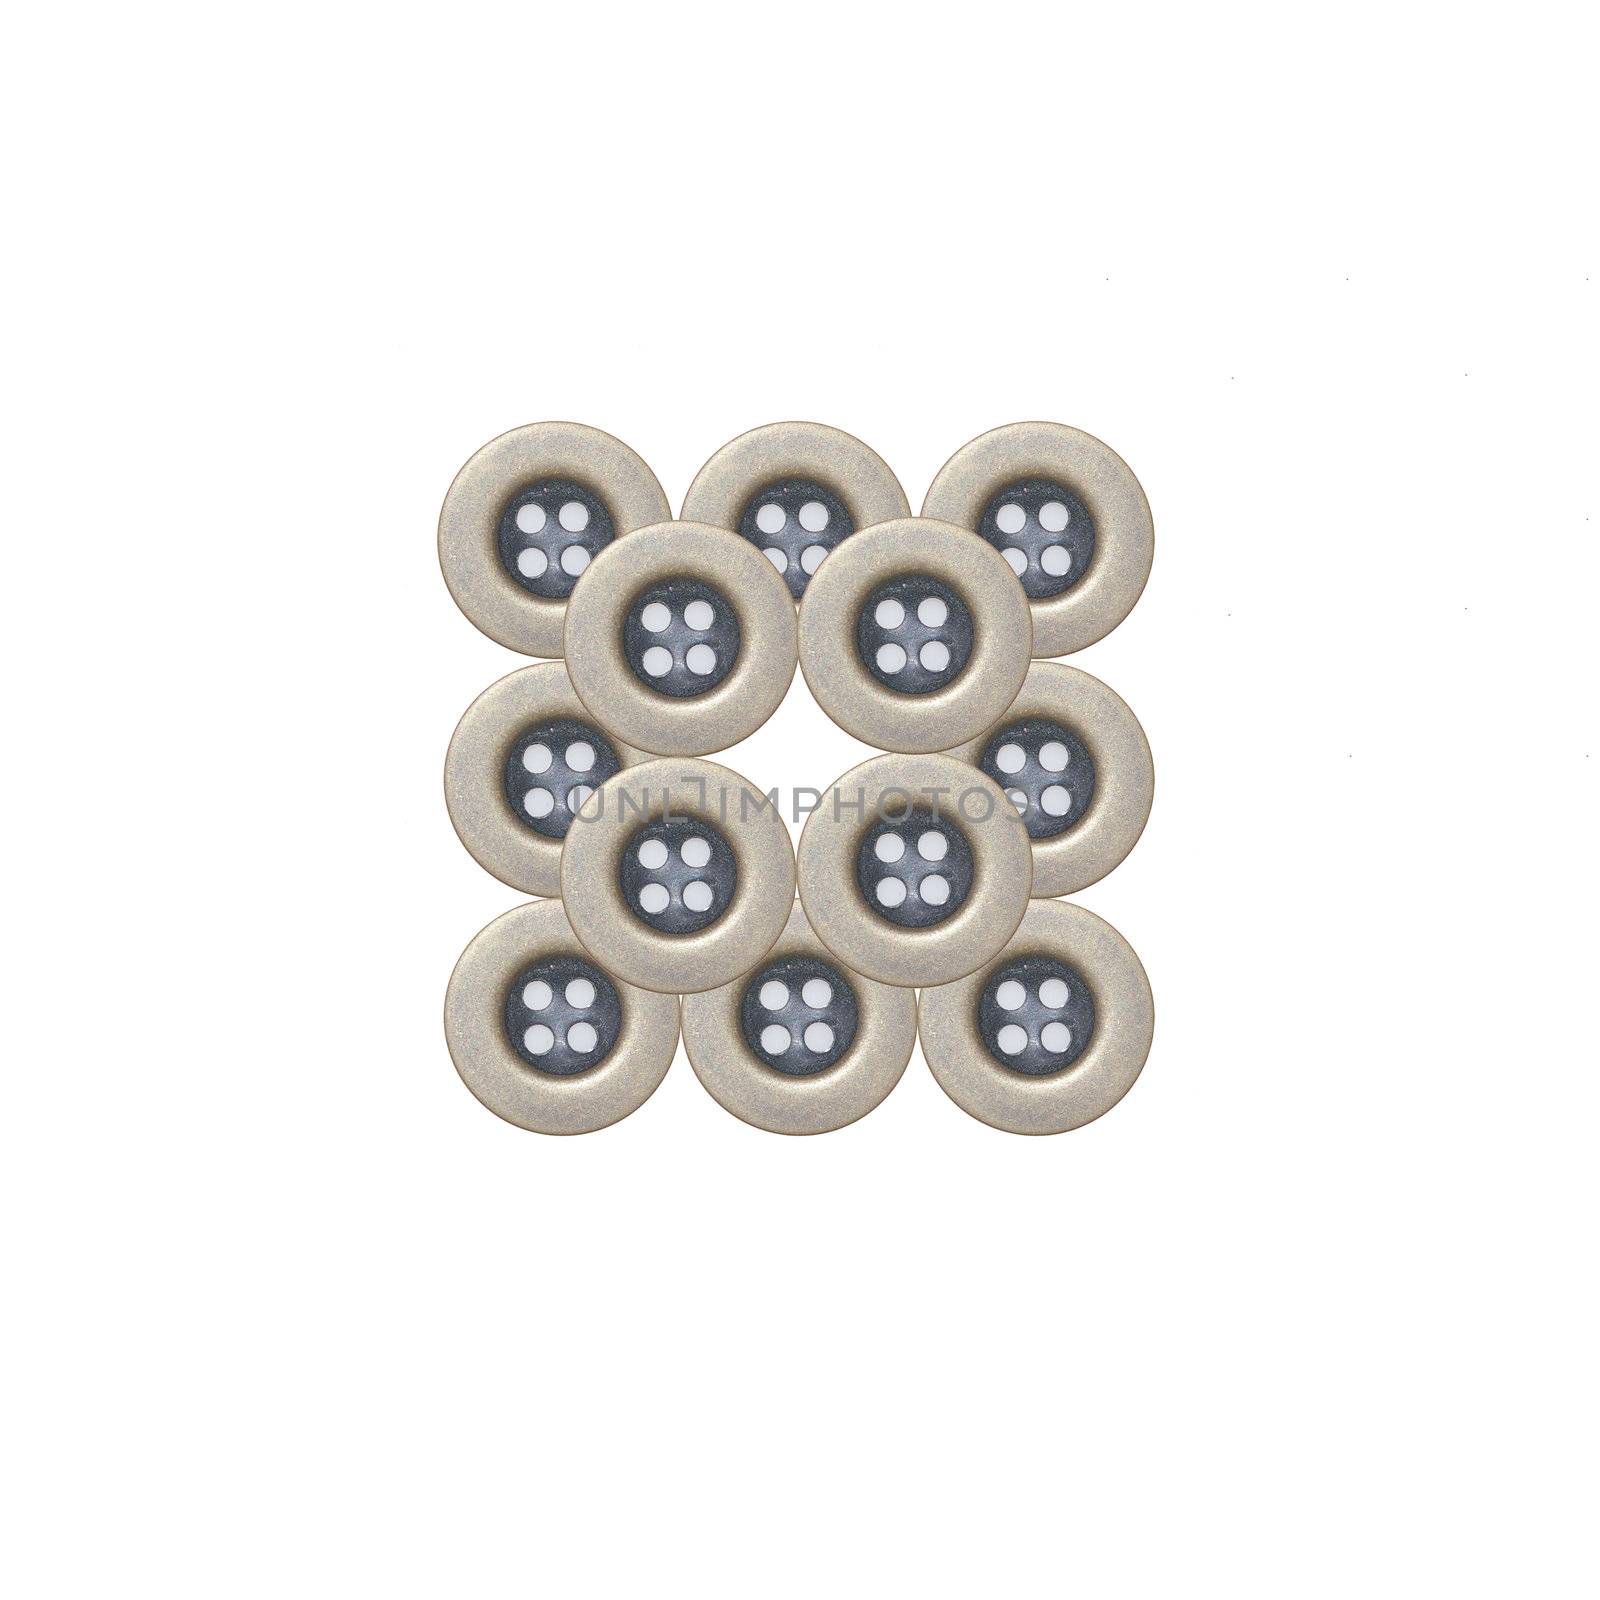 Cloth buttons isolated on white background